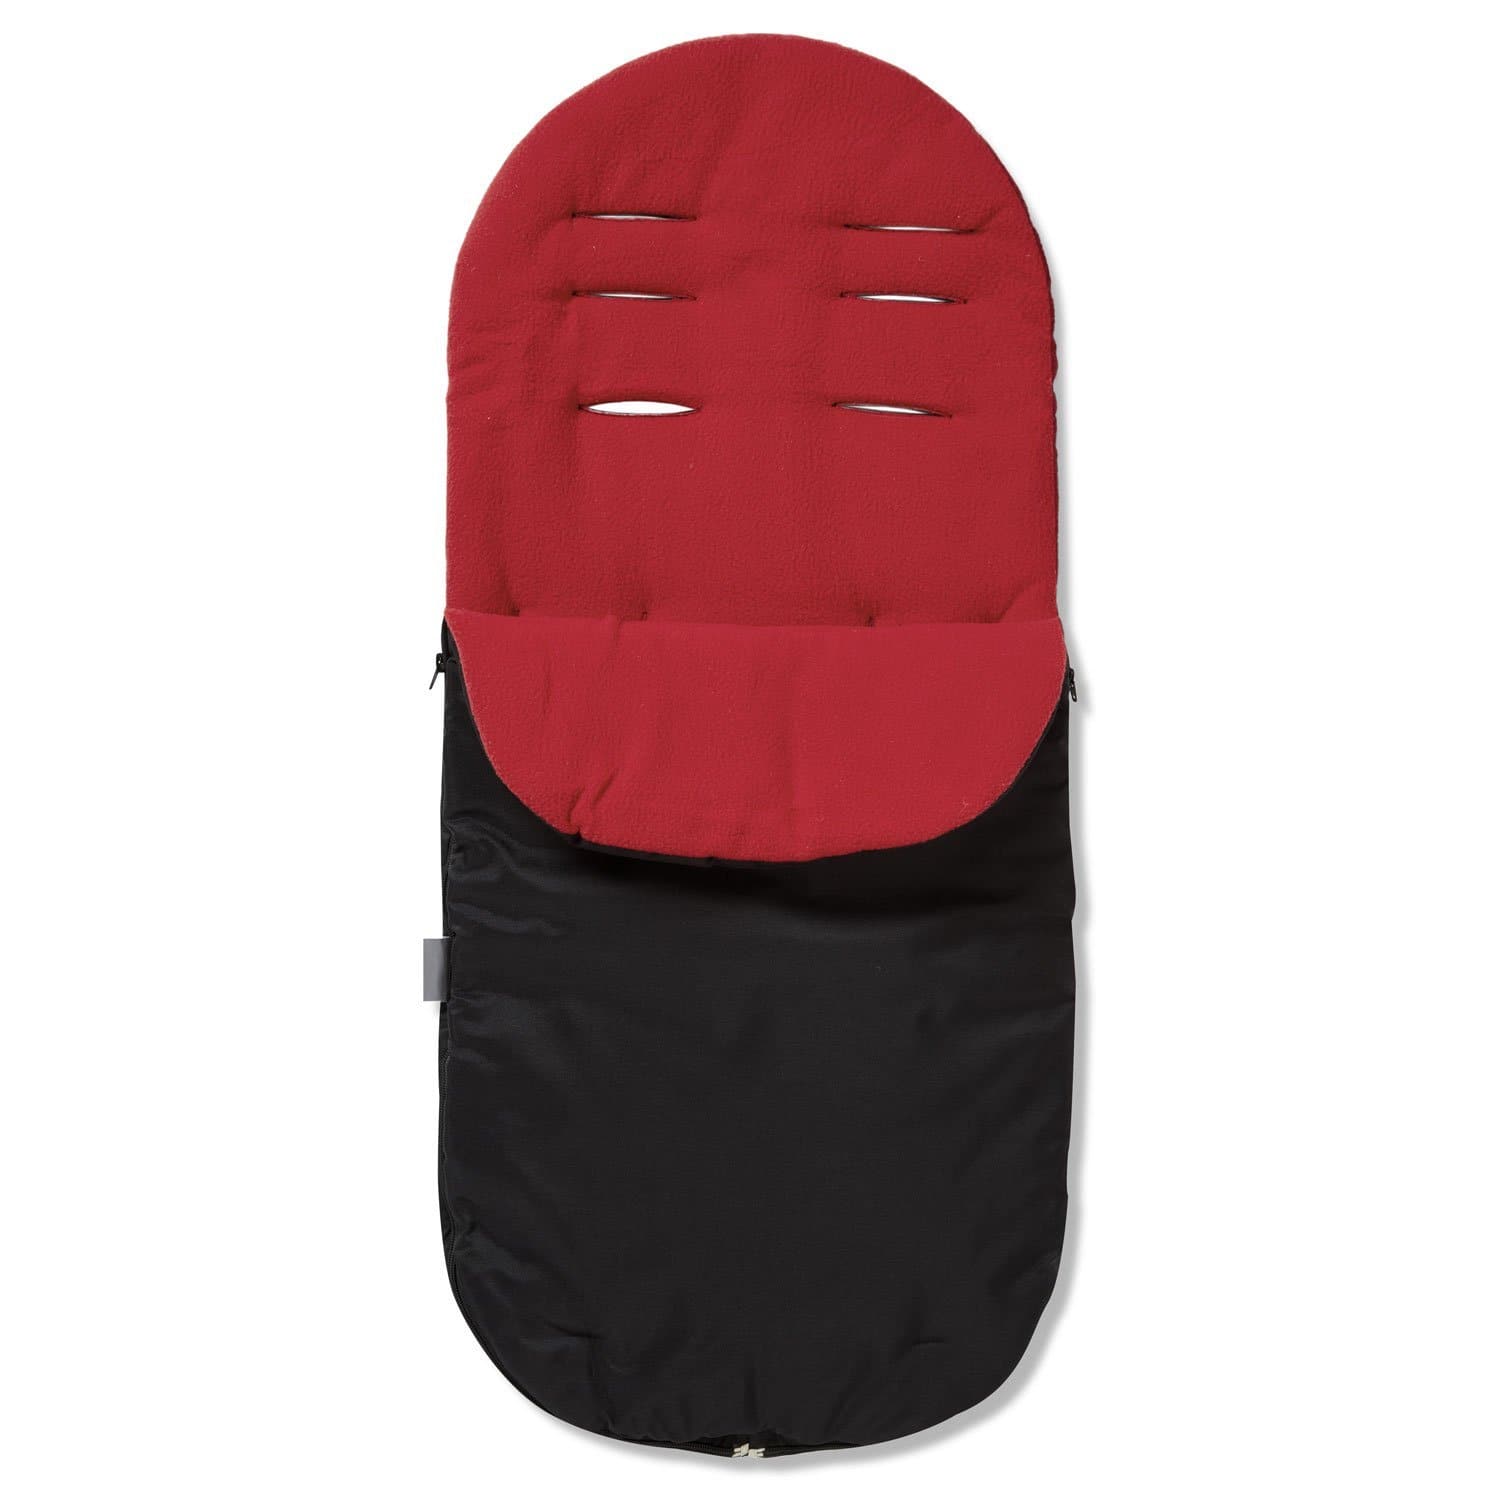 Footmuff / Cosy Toes Compatible with Bebe Confort - Red / Fits All Models | For Your Little One